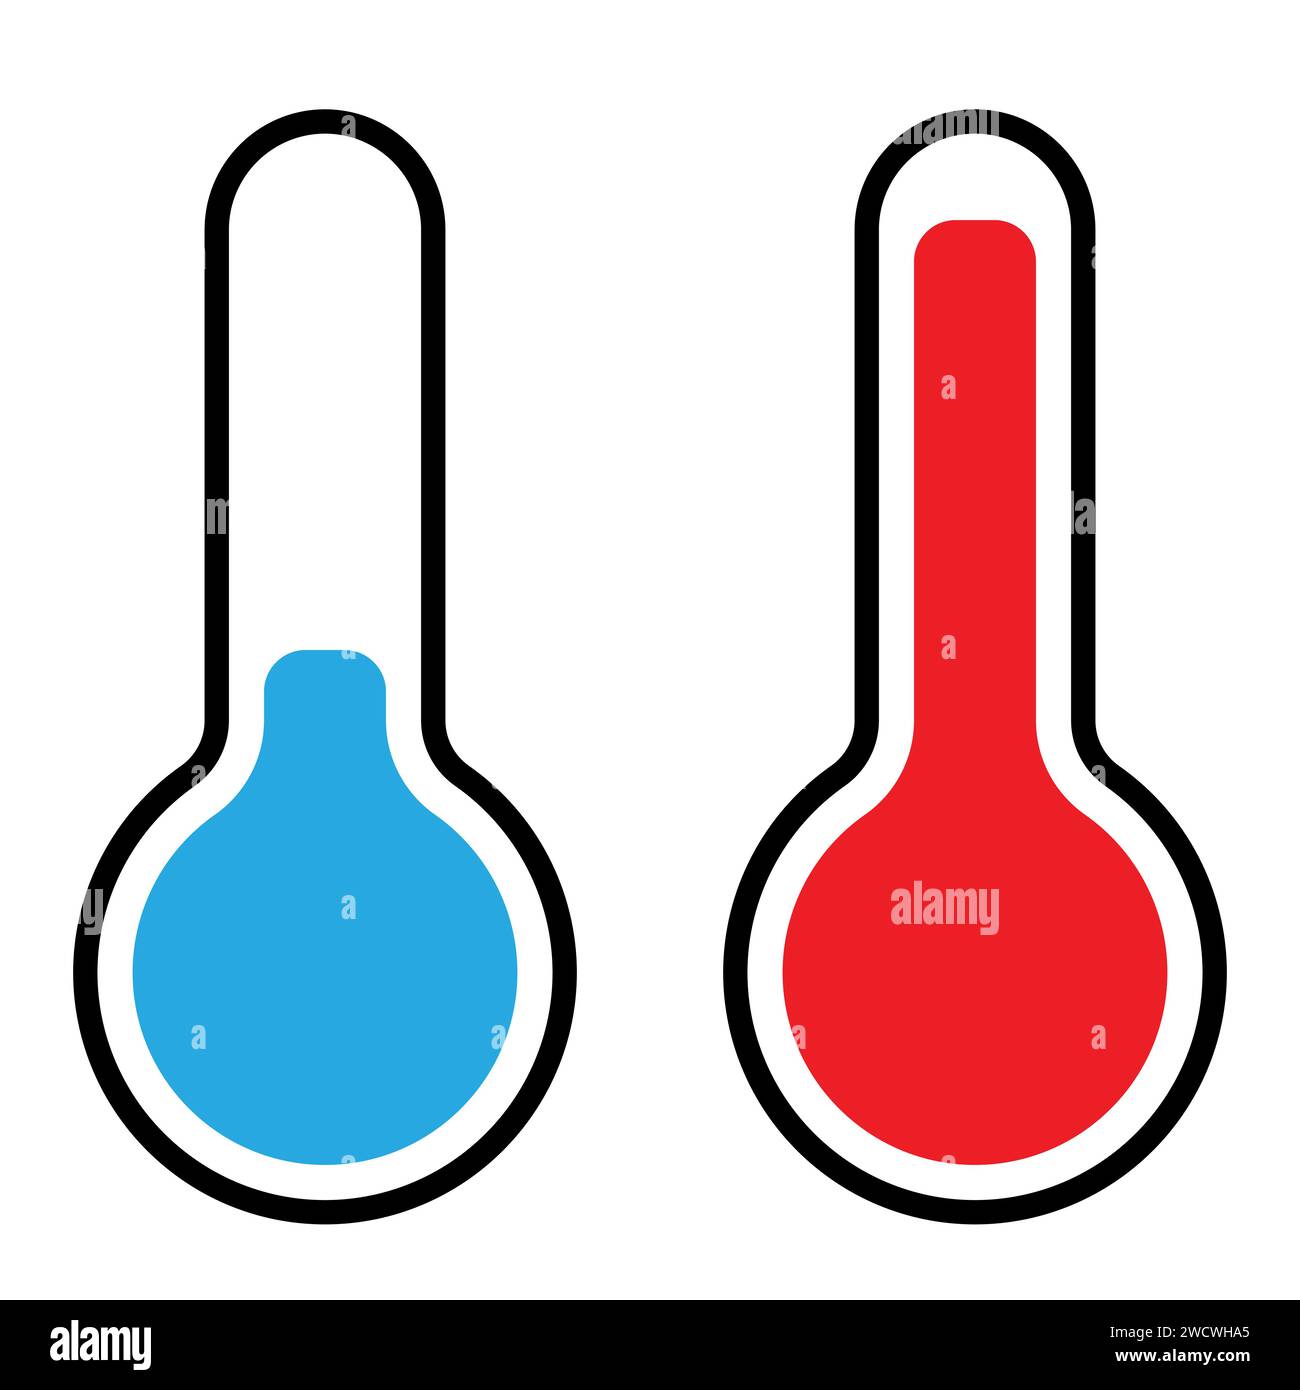 thermometer icon set, blue cold and red heat vector symbol illustration of a device that measures temperature Stock Vector